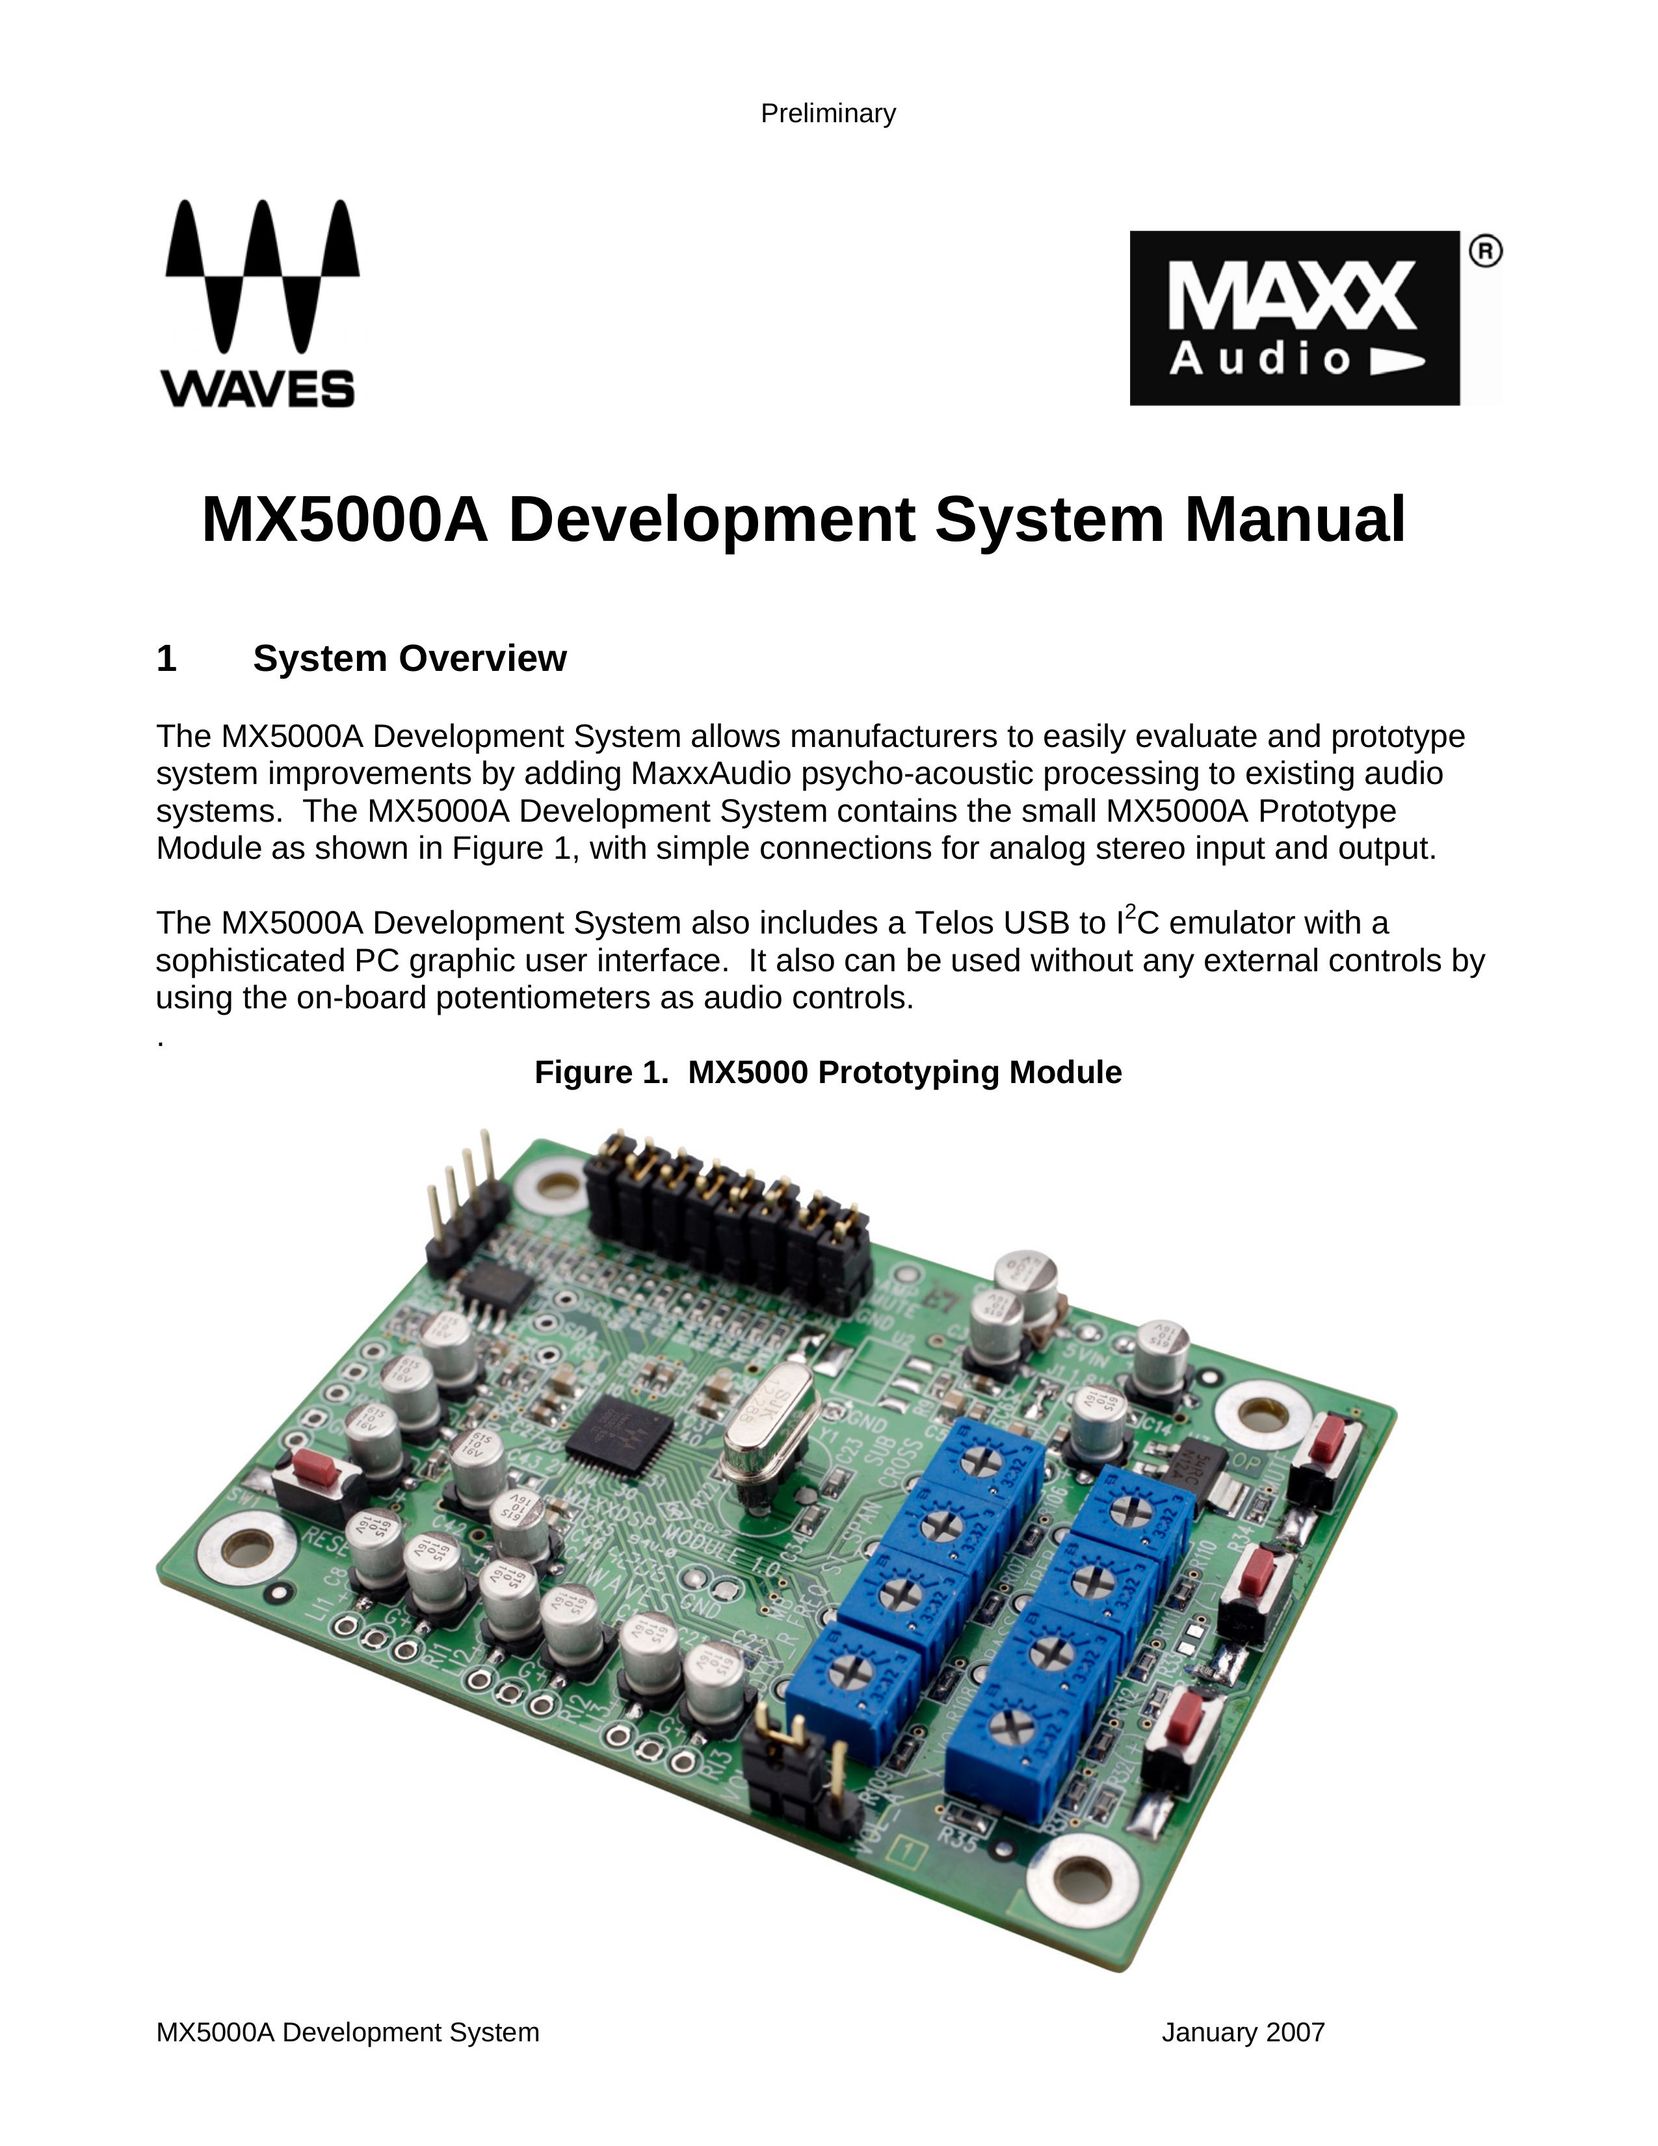 Waves MX5000A Network Card User Manual